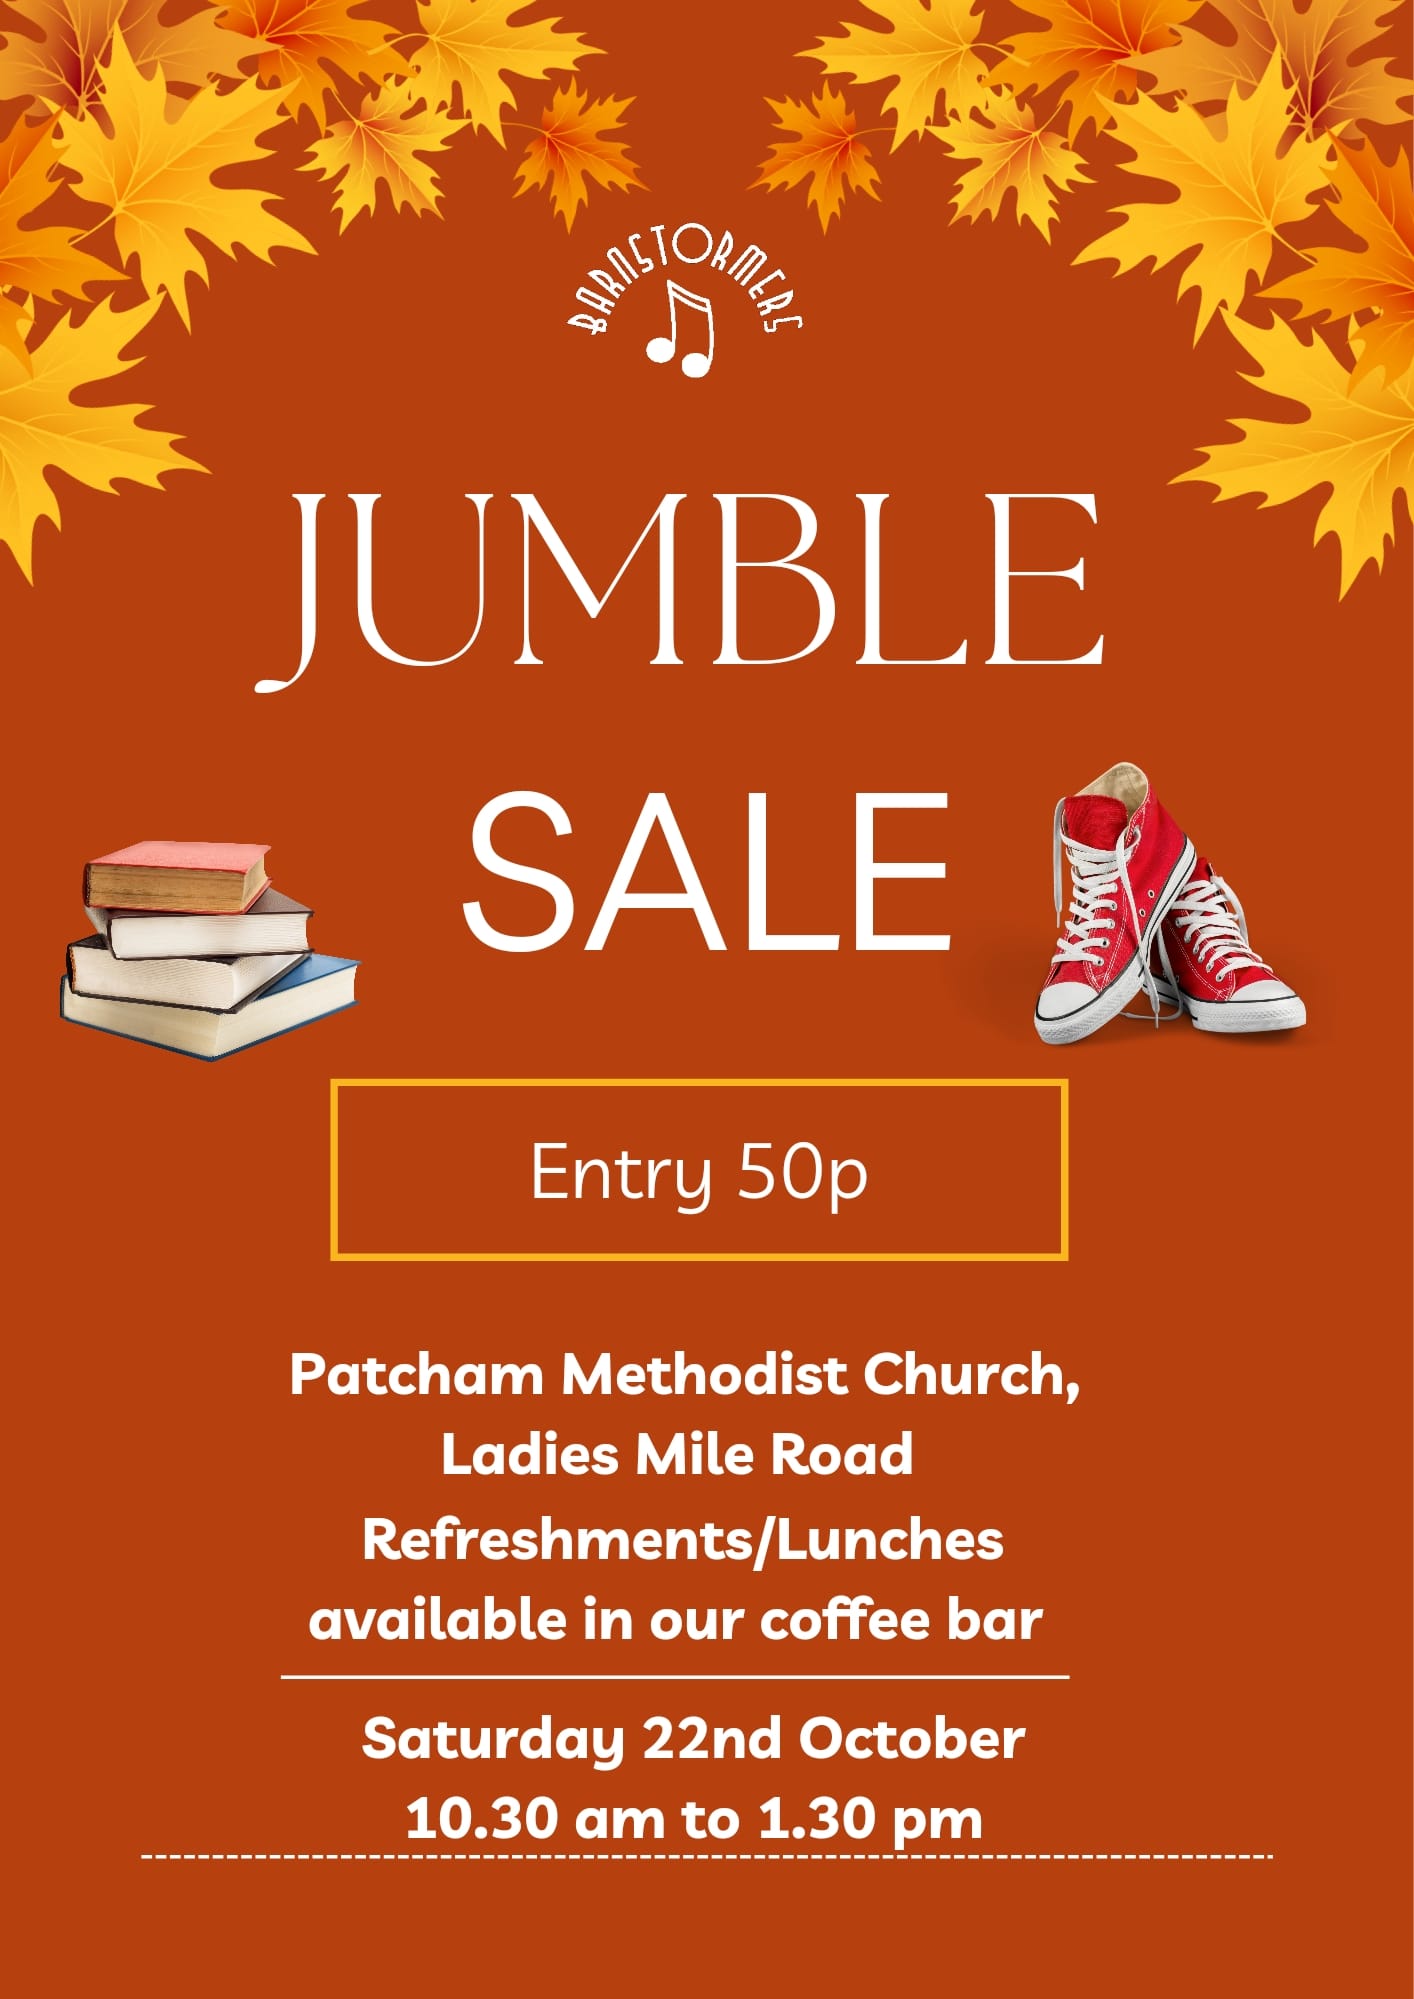 Jumble Sale Poster - details in the text above.